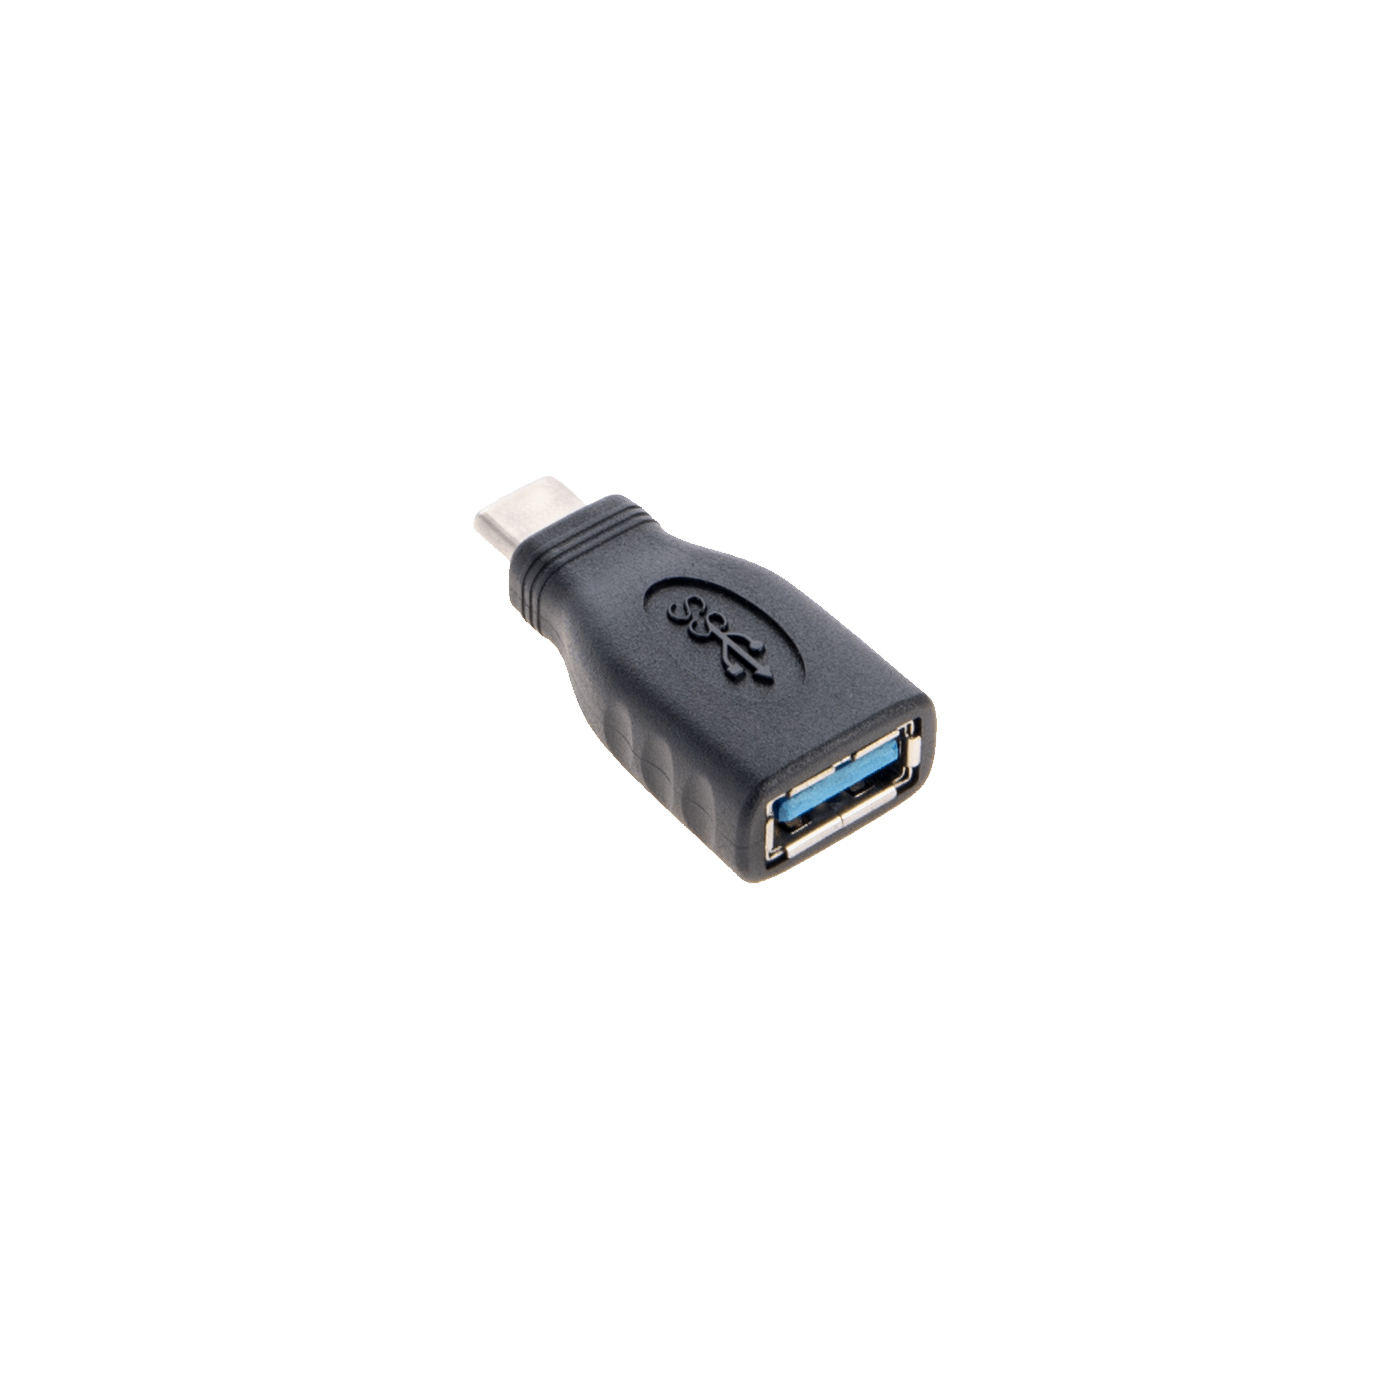 Photos - Cable (video, audio, USB) Jabra USB-A Adapter  14208-14 (USB-A Female to USB-C Male)